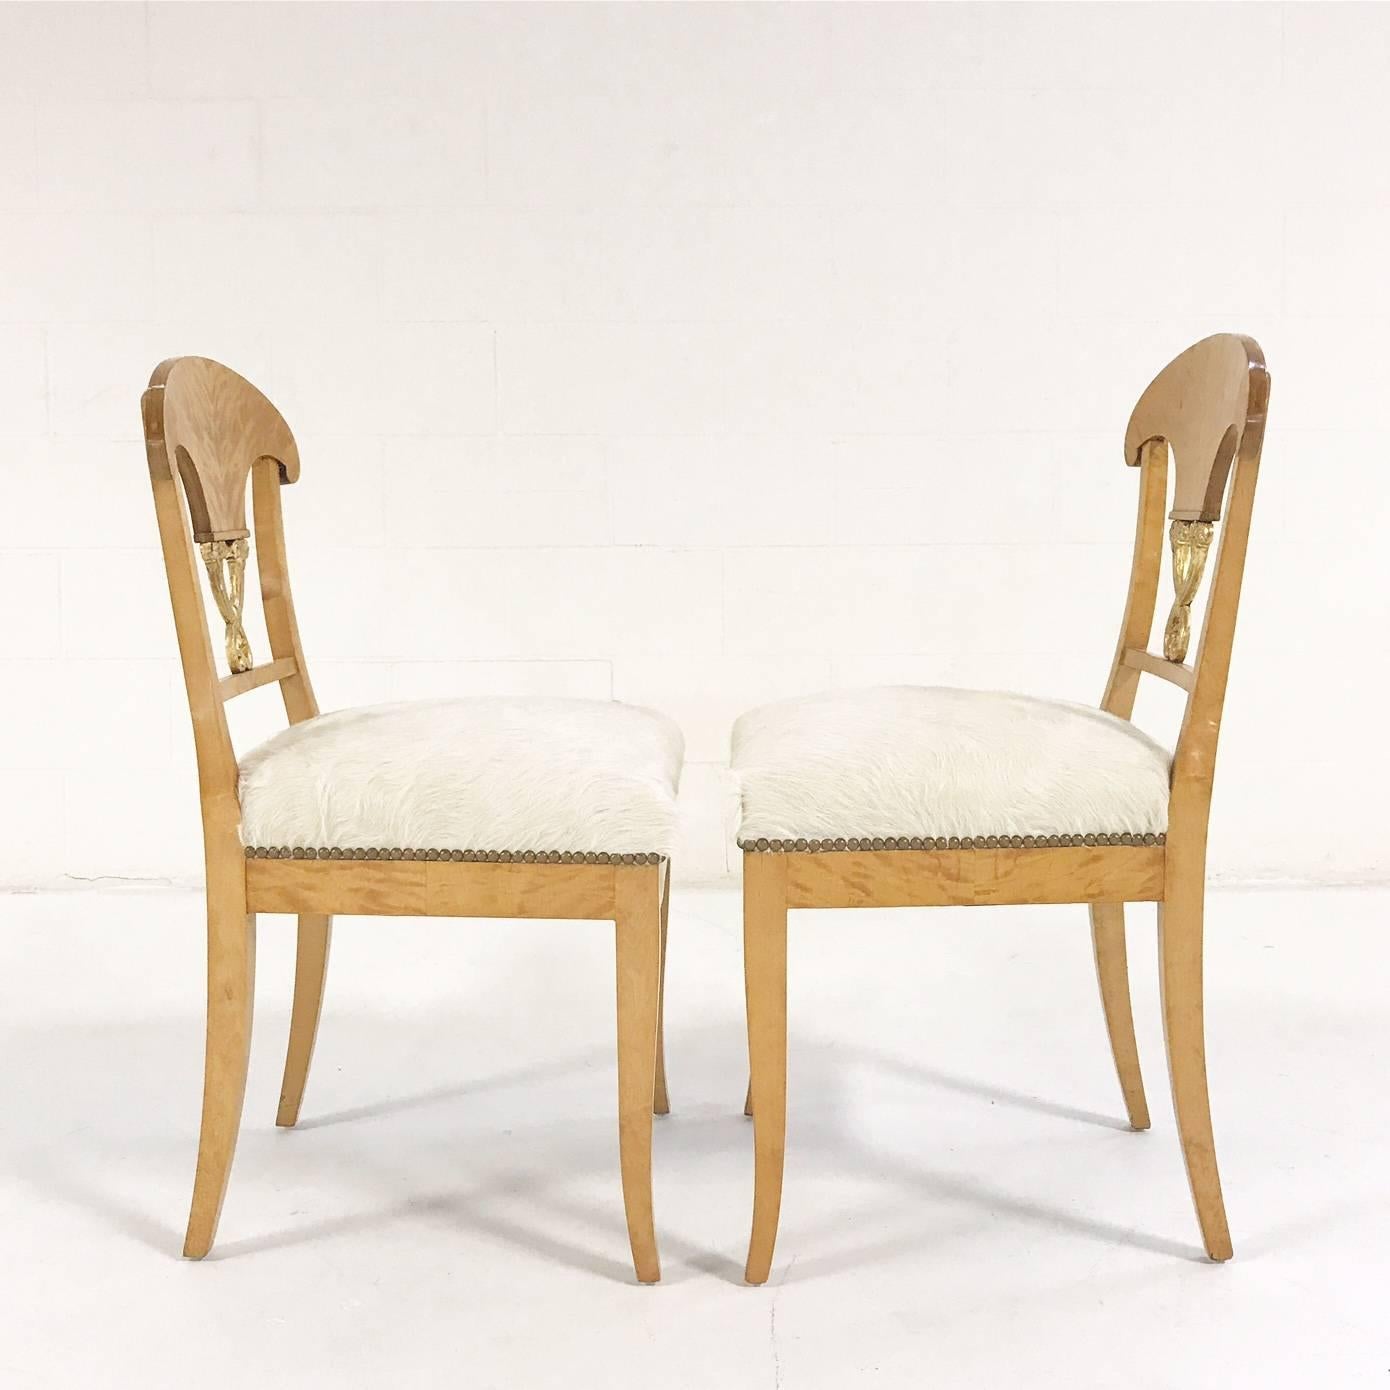 This is a lovely pair of Biedermeier chairs, circa 1820 Austria. We love the blond satin birch and the gilt details. We restored each chair with new foam and upholstered in our natural, silky soft ivory Brazilian cowhide.

Measure: 18